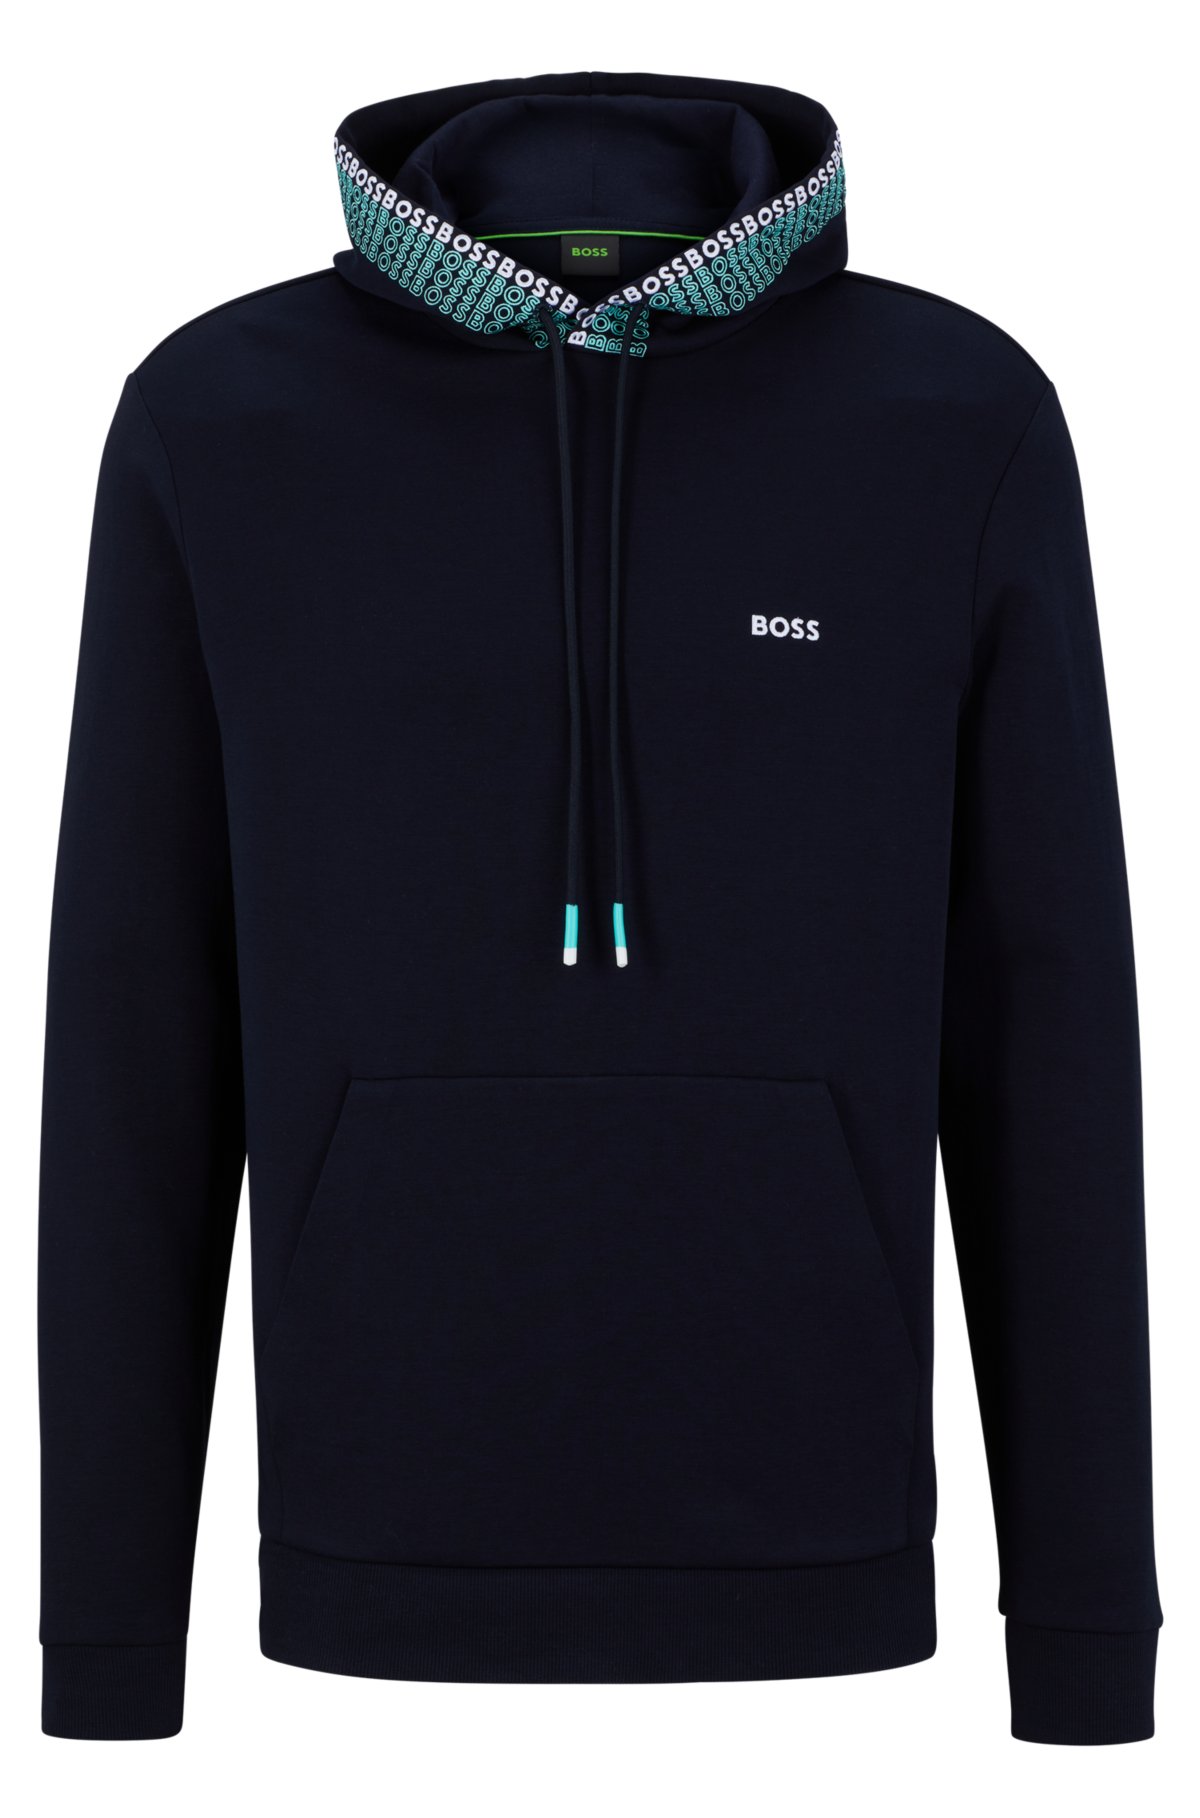 BOSS - Cotton-blend hoodie multi-colored logos